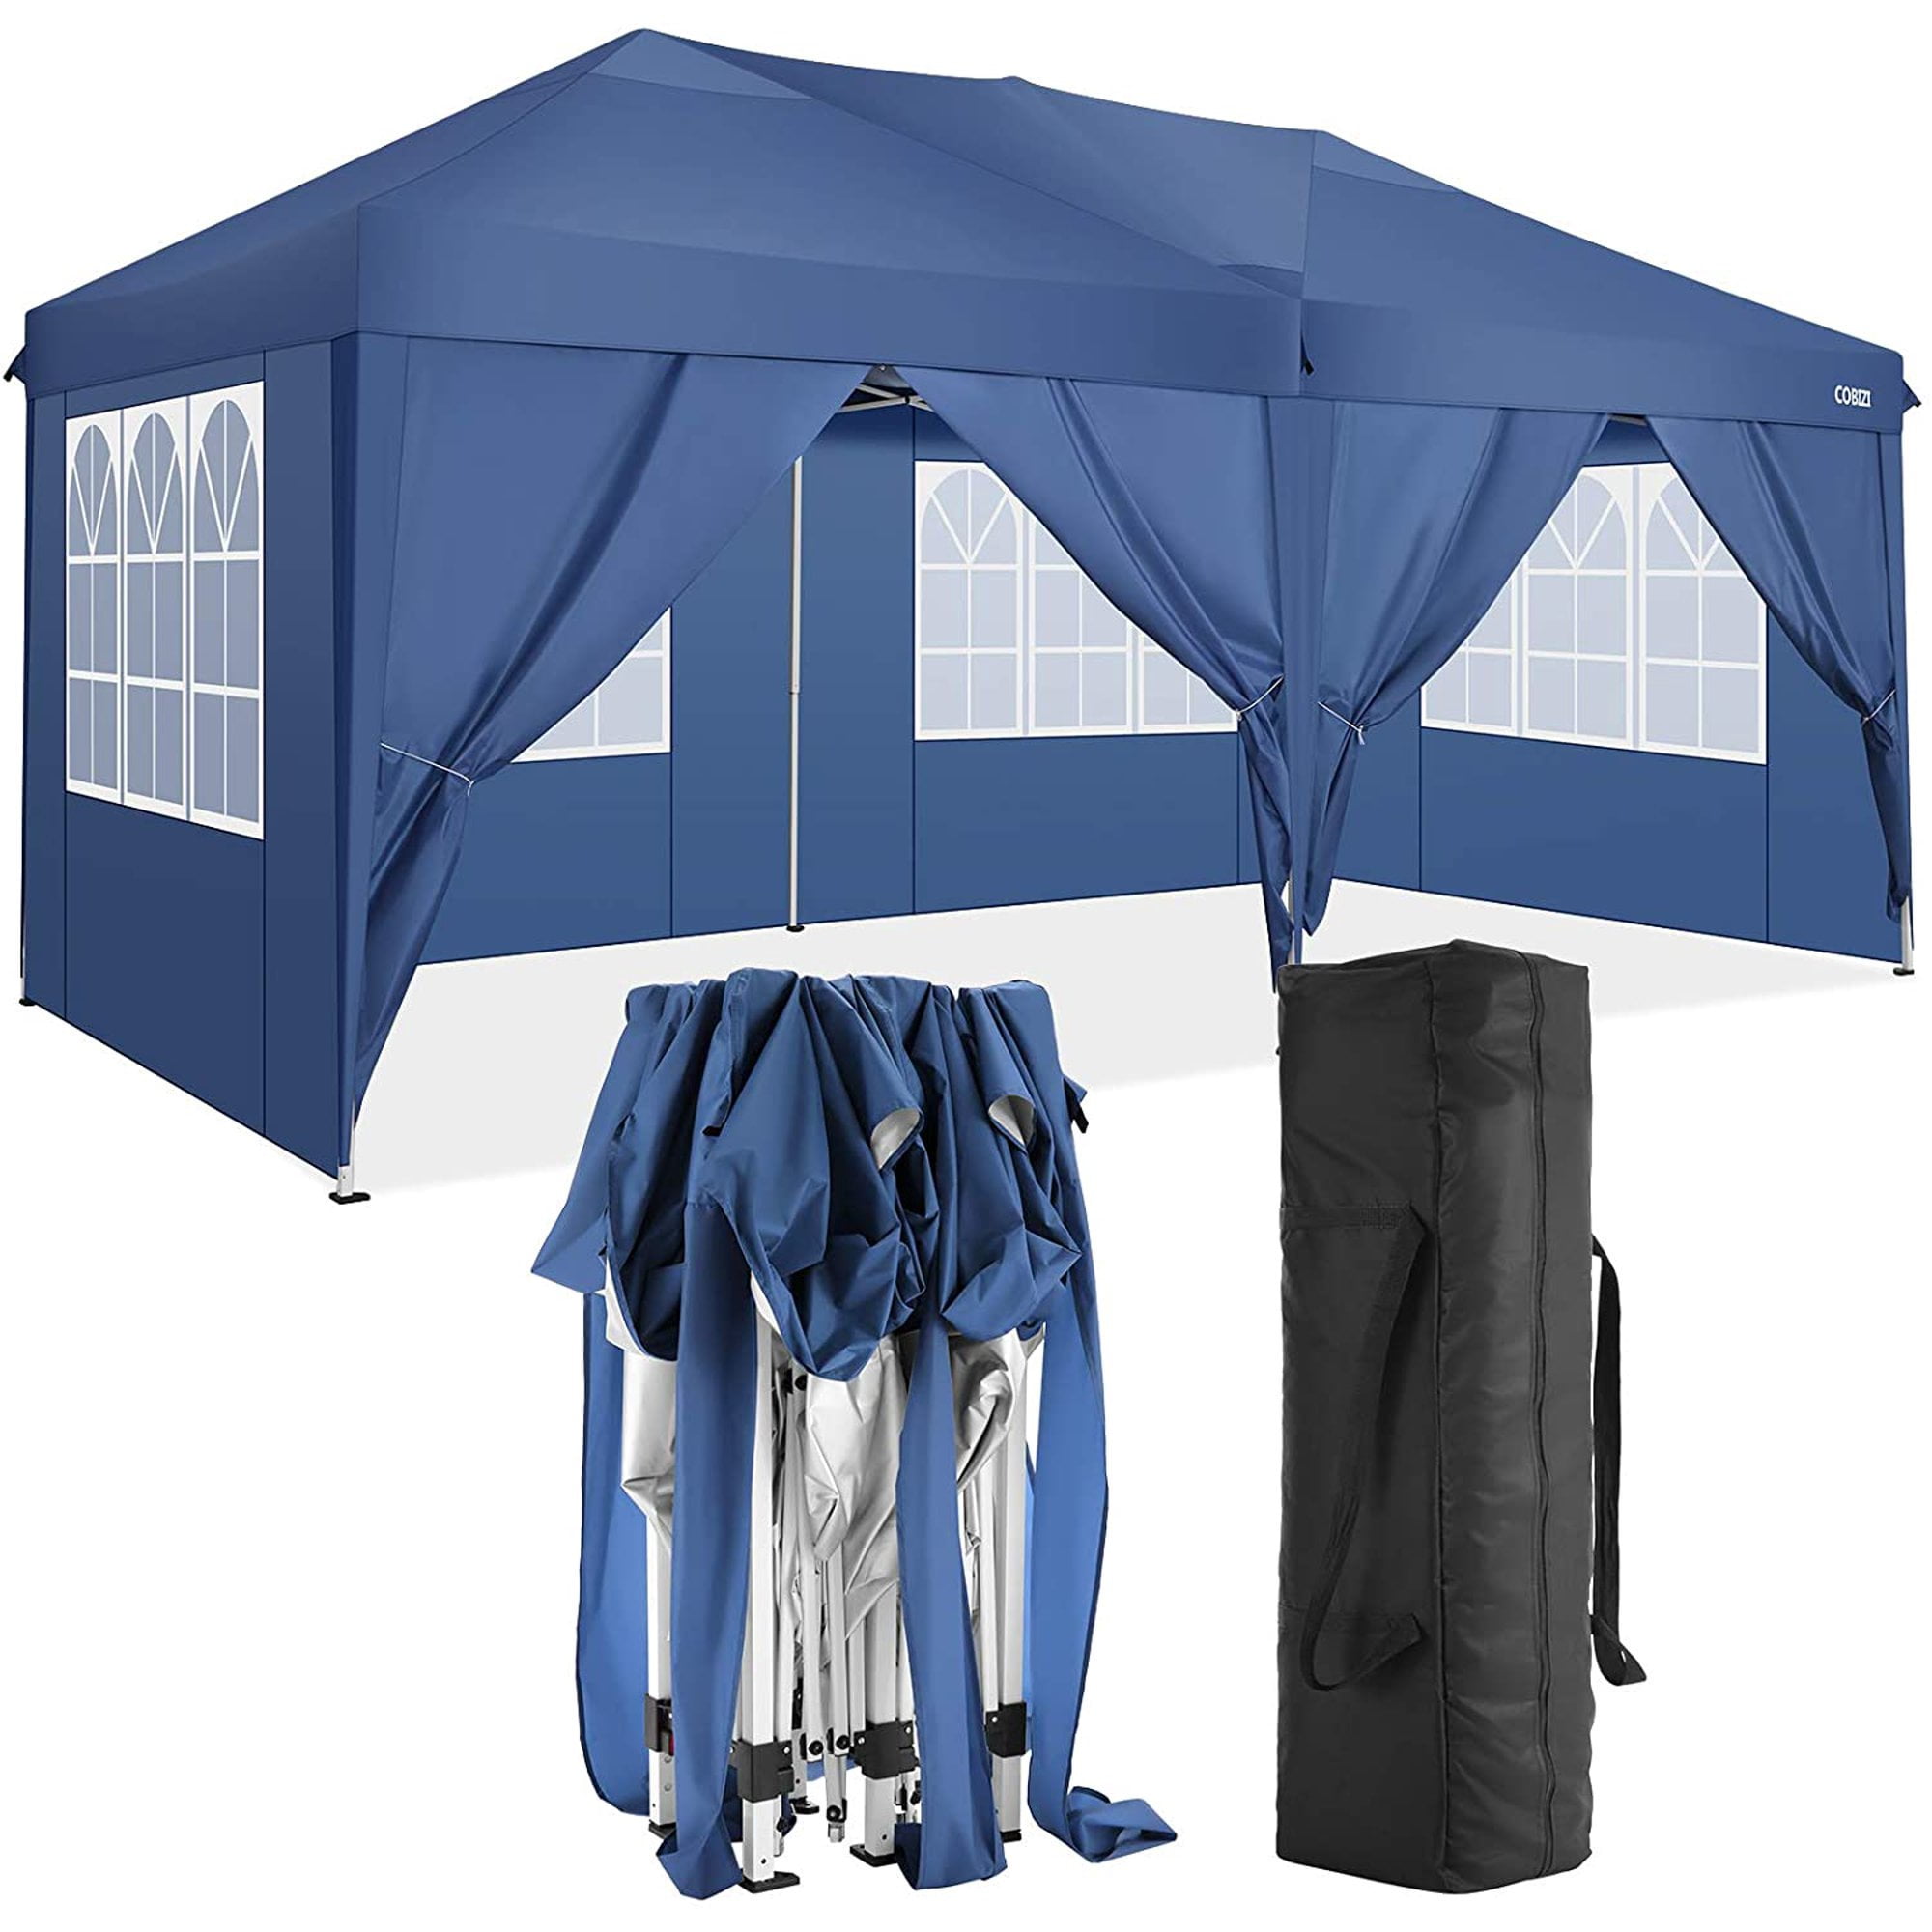 Blue with 4 Sidewalls Gazebo for Party or Camping Outdoor Event,Portable Wheeled Carrying Bag DOIT 10x20ft Pop Up Canopy Tent Instant Folding Canopy 